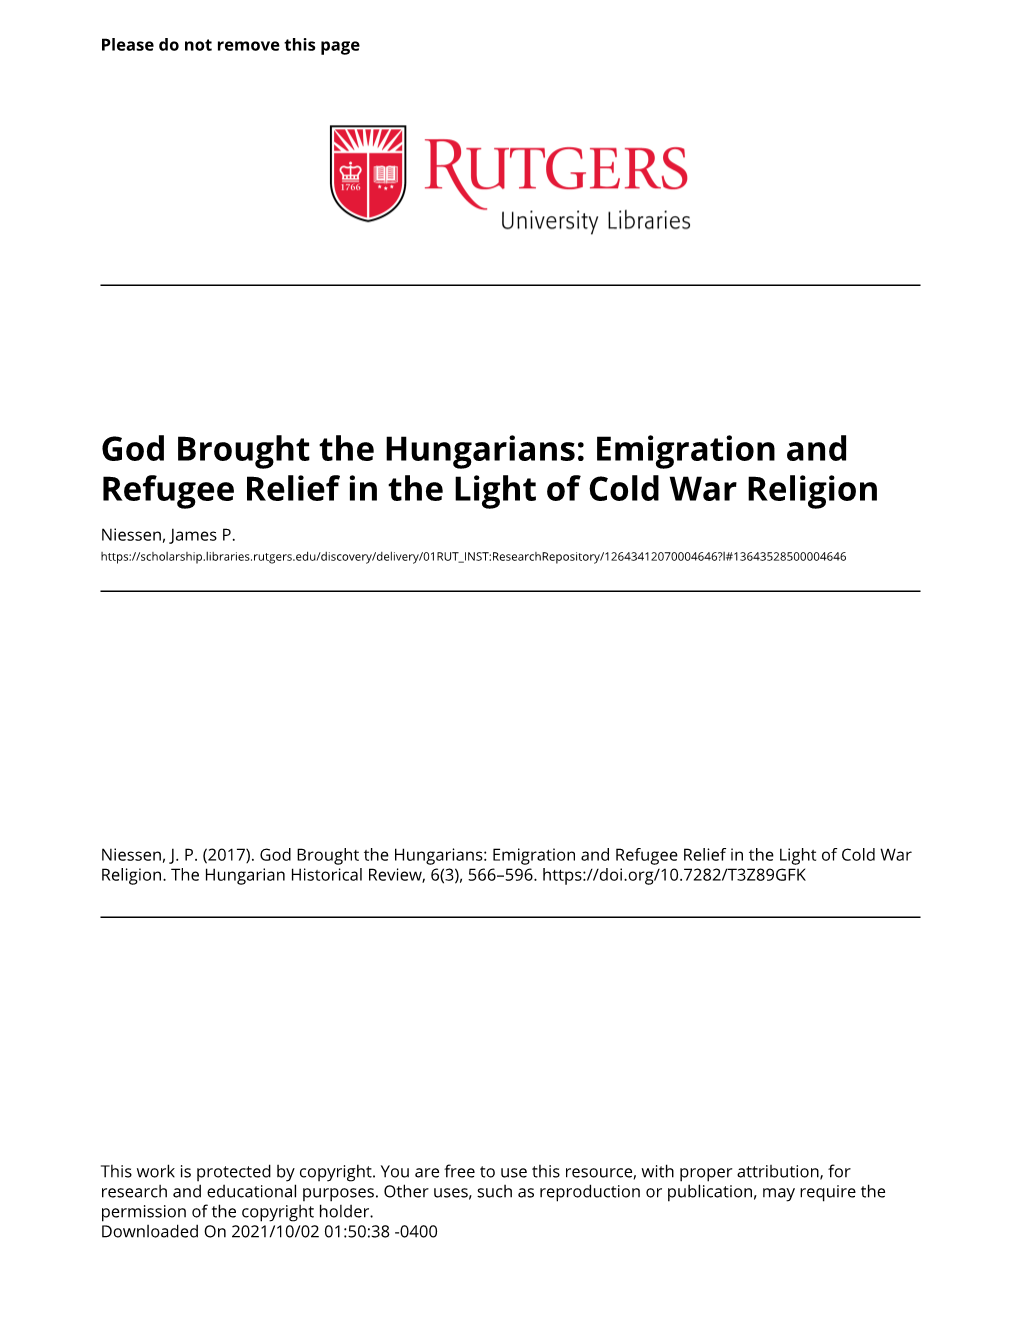 God Brought the Hungarians: Emigration and Refugee Relief in the Light of Cold War Religion